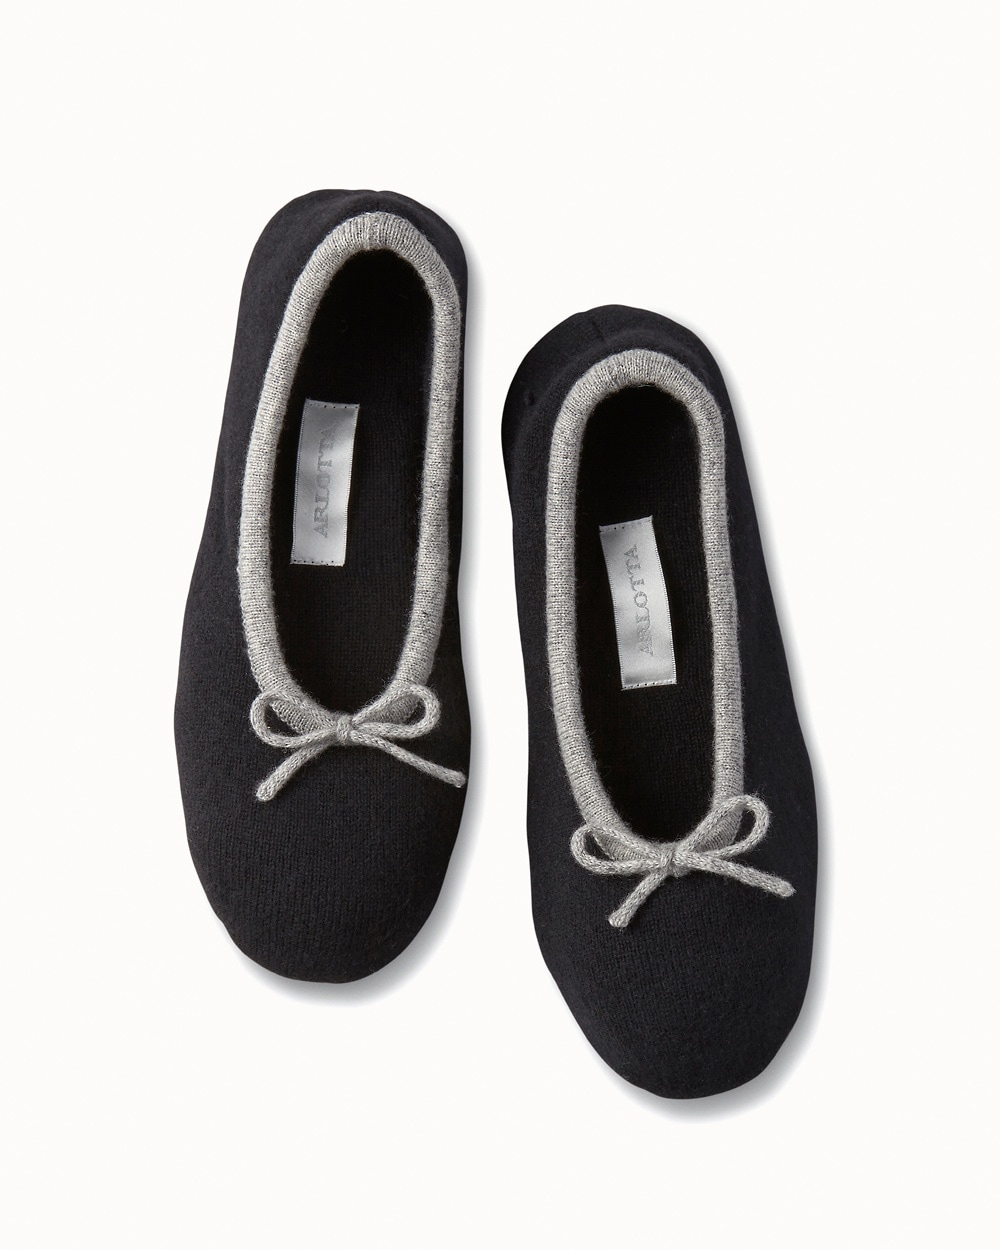 Arlotta Drawcord Cashmere Slippers Black And Heather Grey